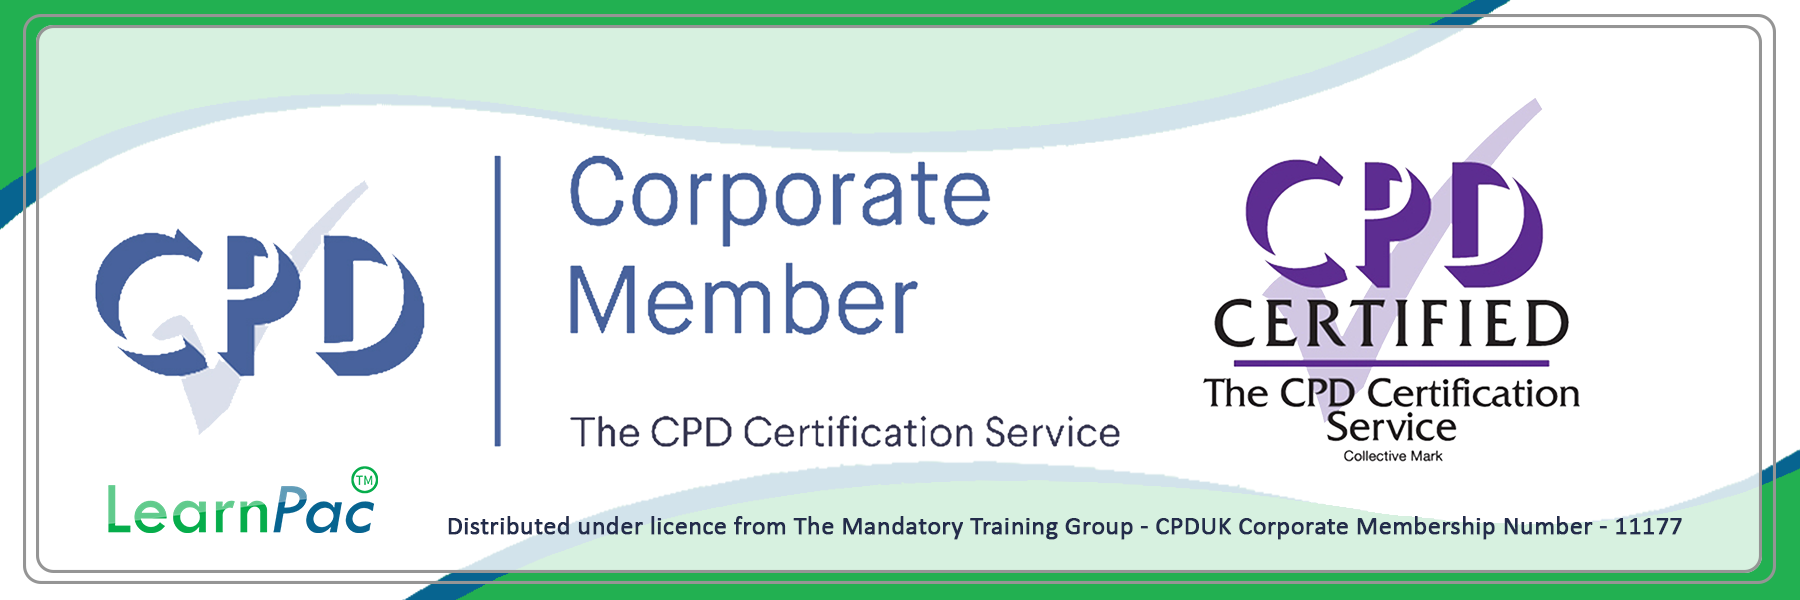 Deprivation of Liberty Safeguards - E-Learning Courses with Certificates - CPD Certified - LearnPac Systems UK -